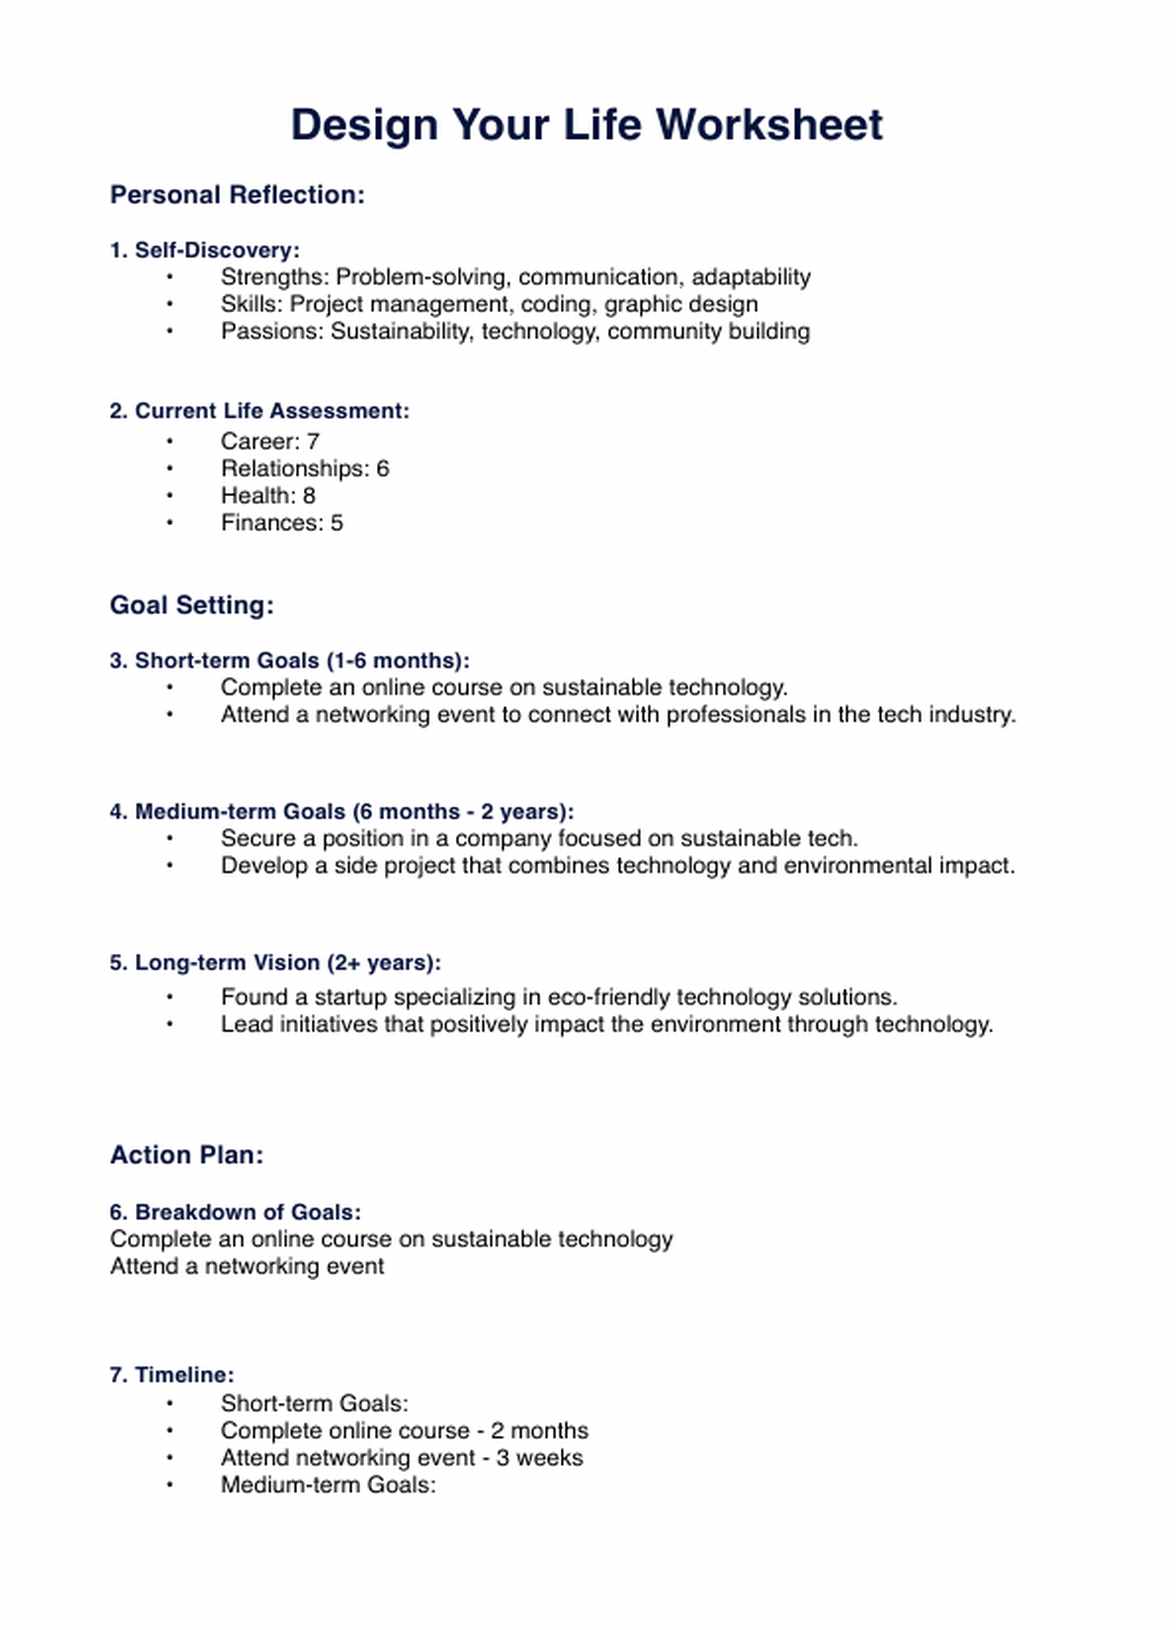 Design Your Life Worksheets PDF Example